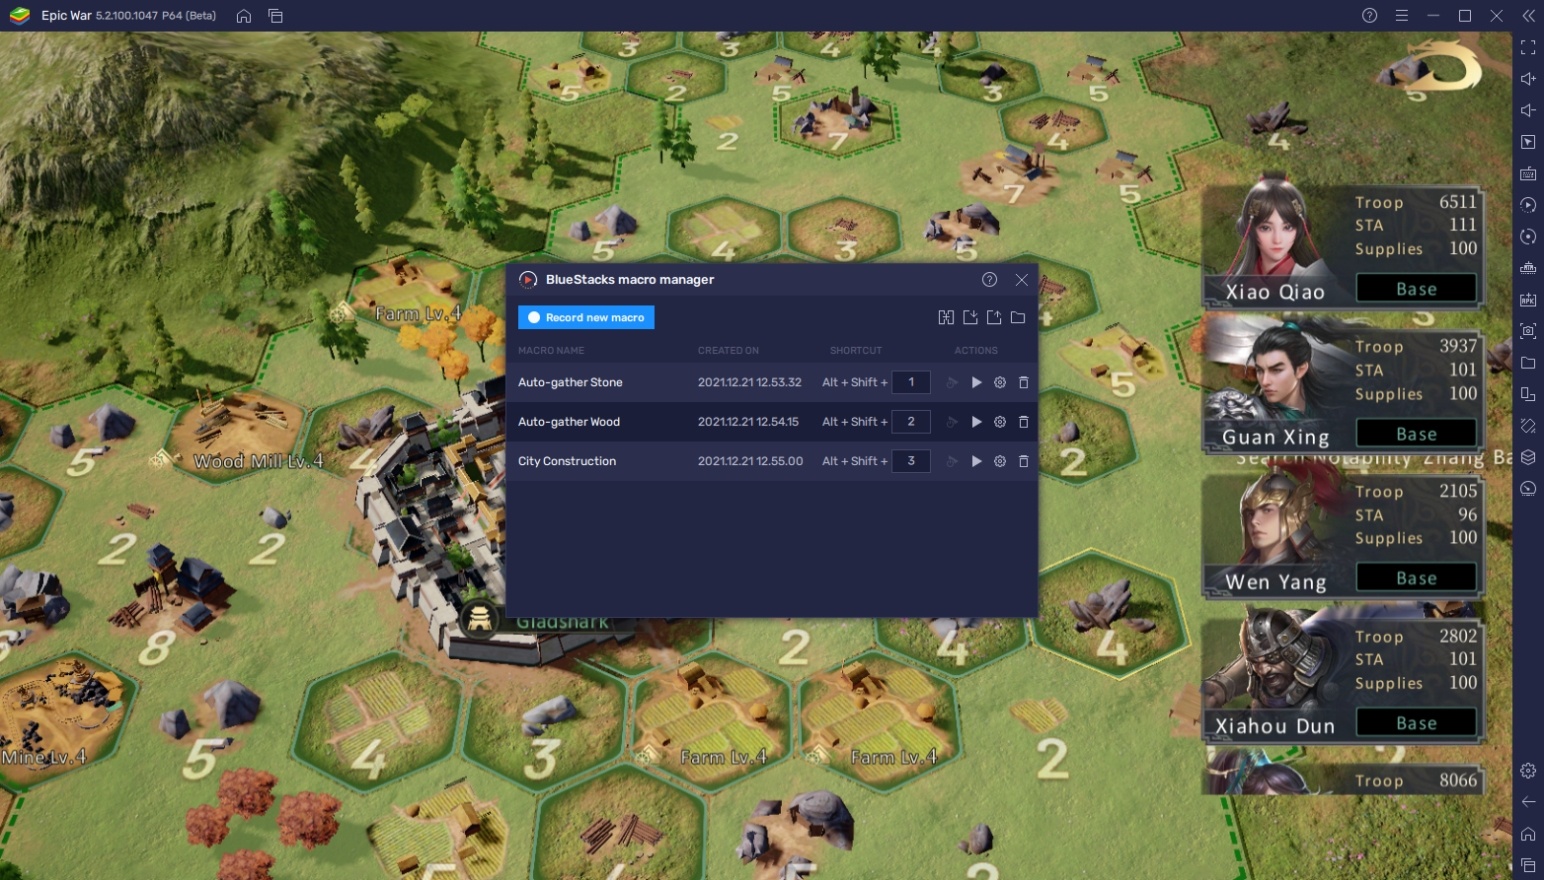 How to Play Epic War: Thrones on PC with BlueStacks